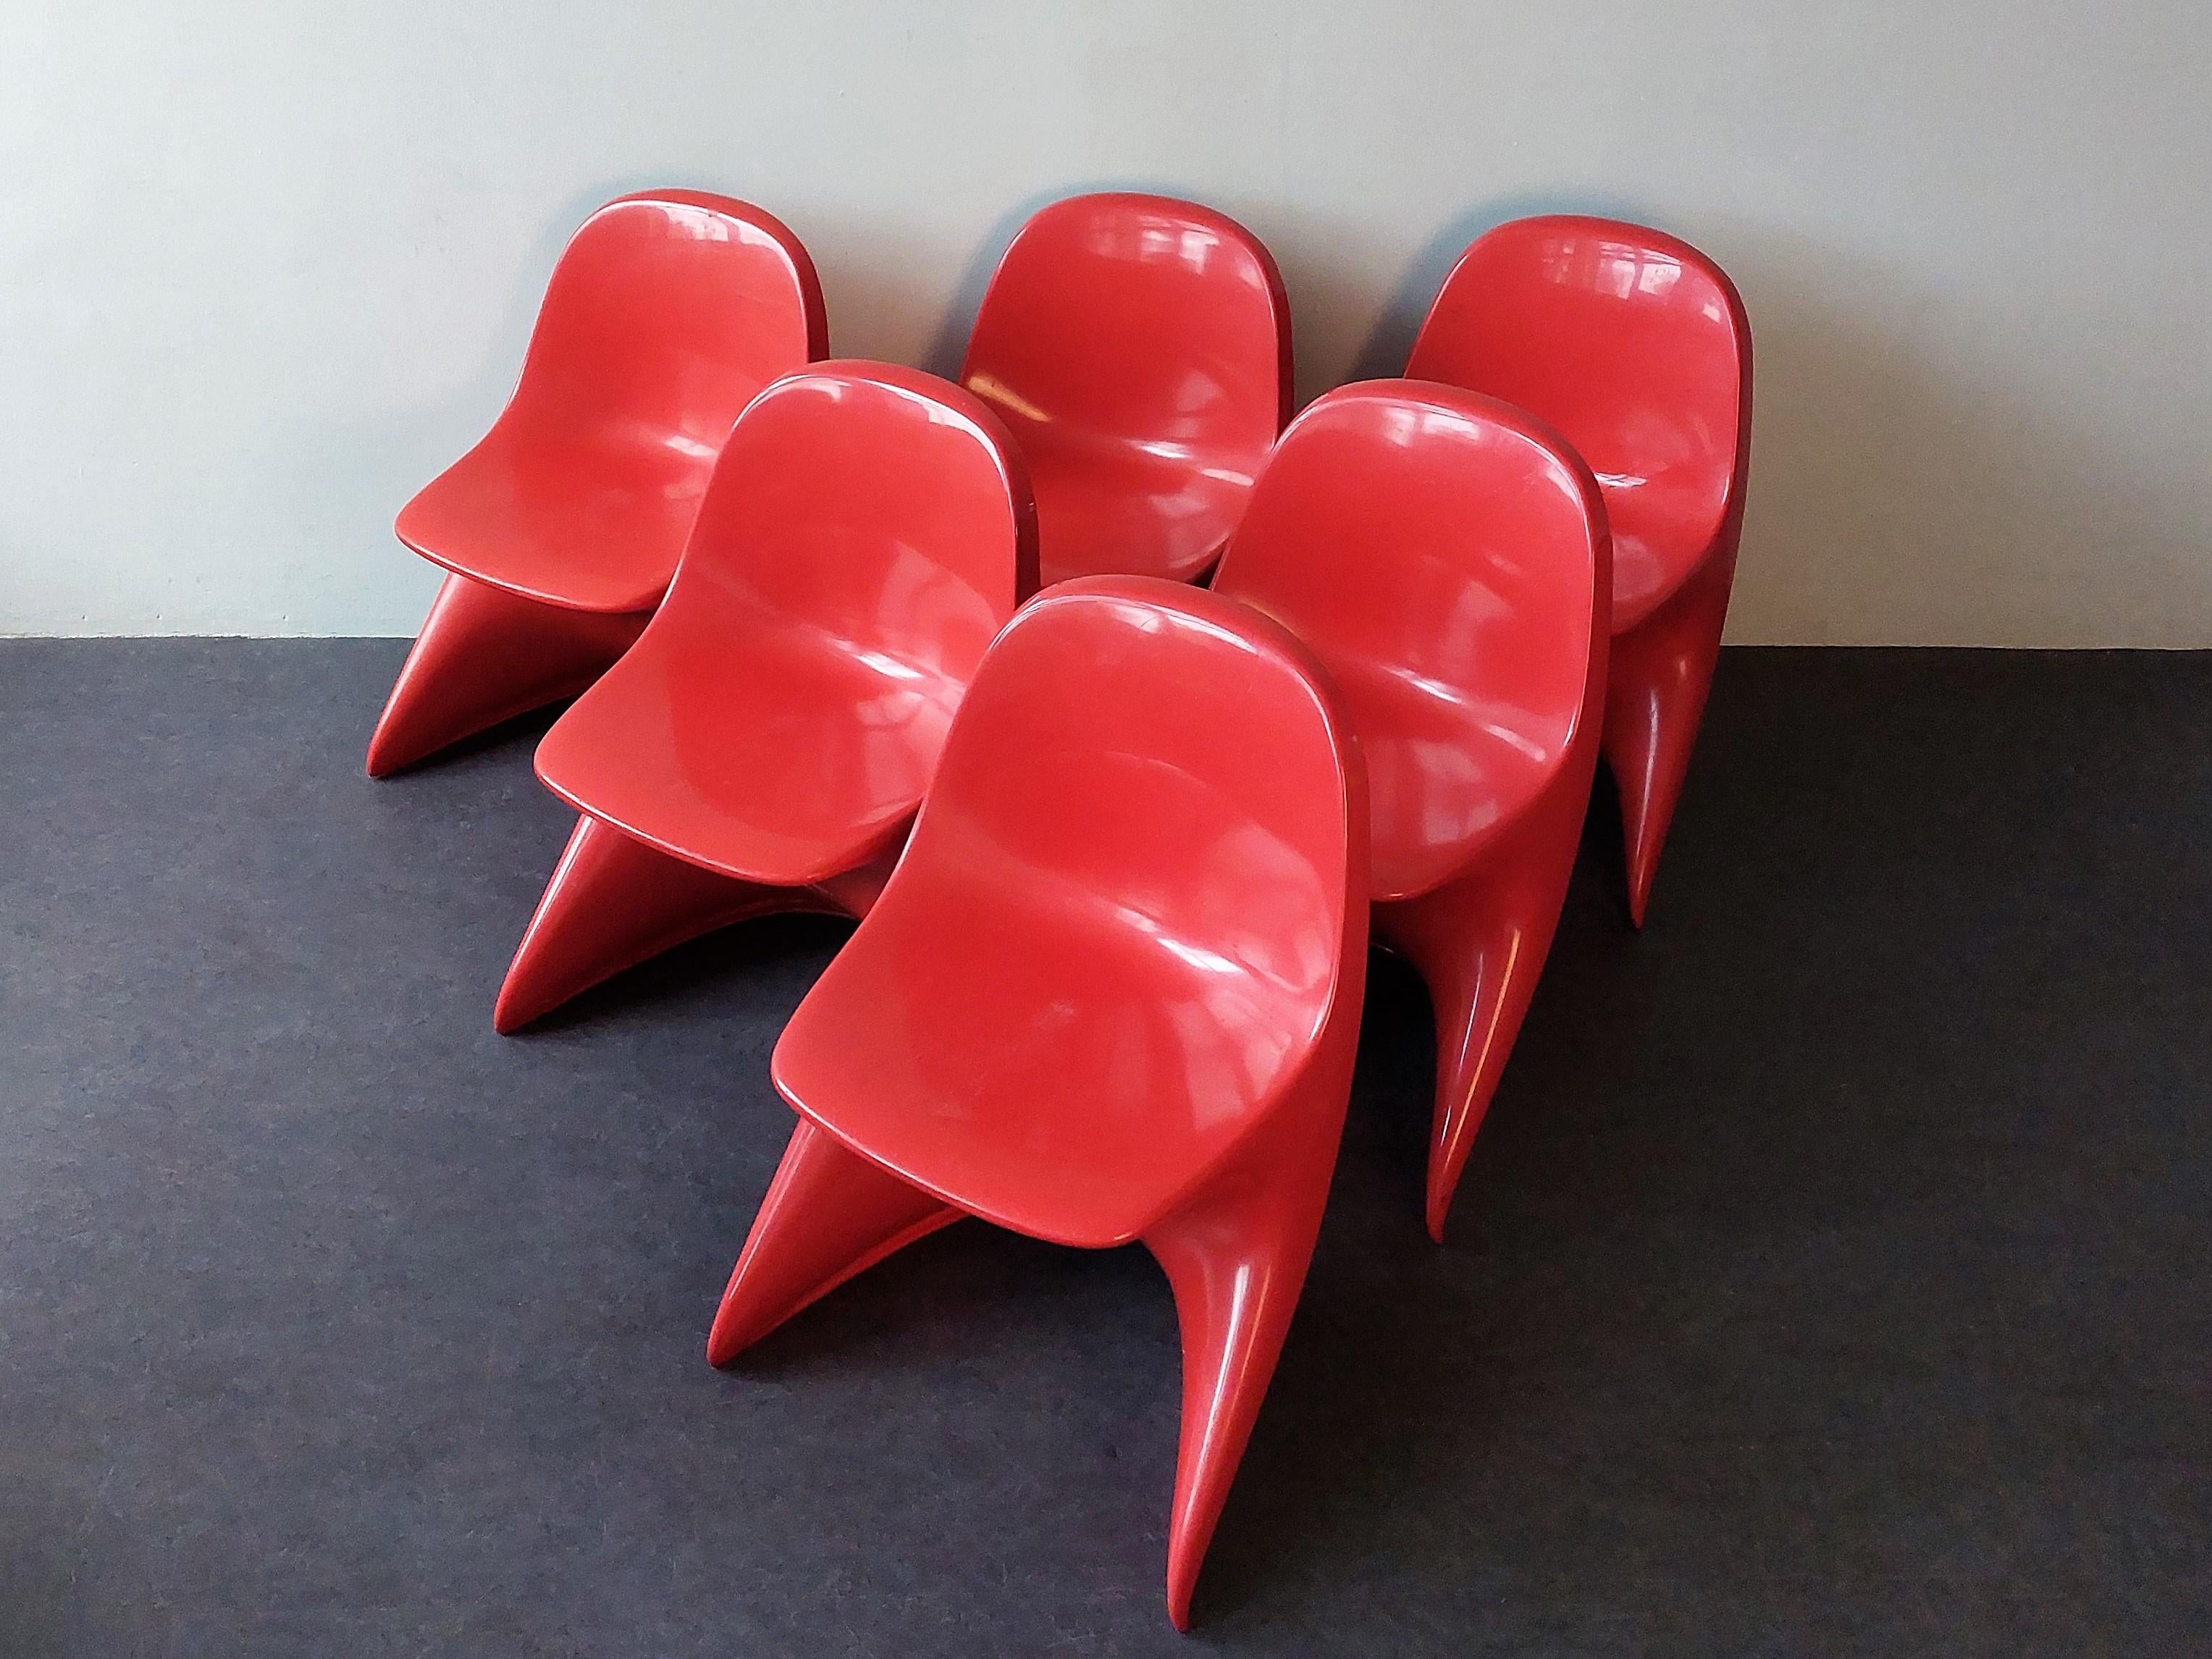 Plastic Set of 6 Casalino1 Children's Chairs by Alexander Begge for Casala, Italy 1970's For Sale